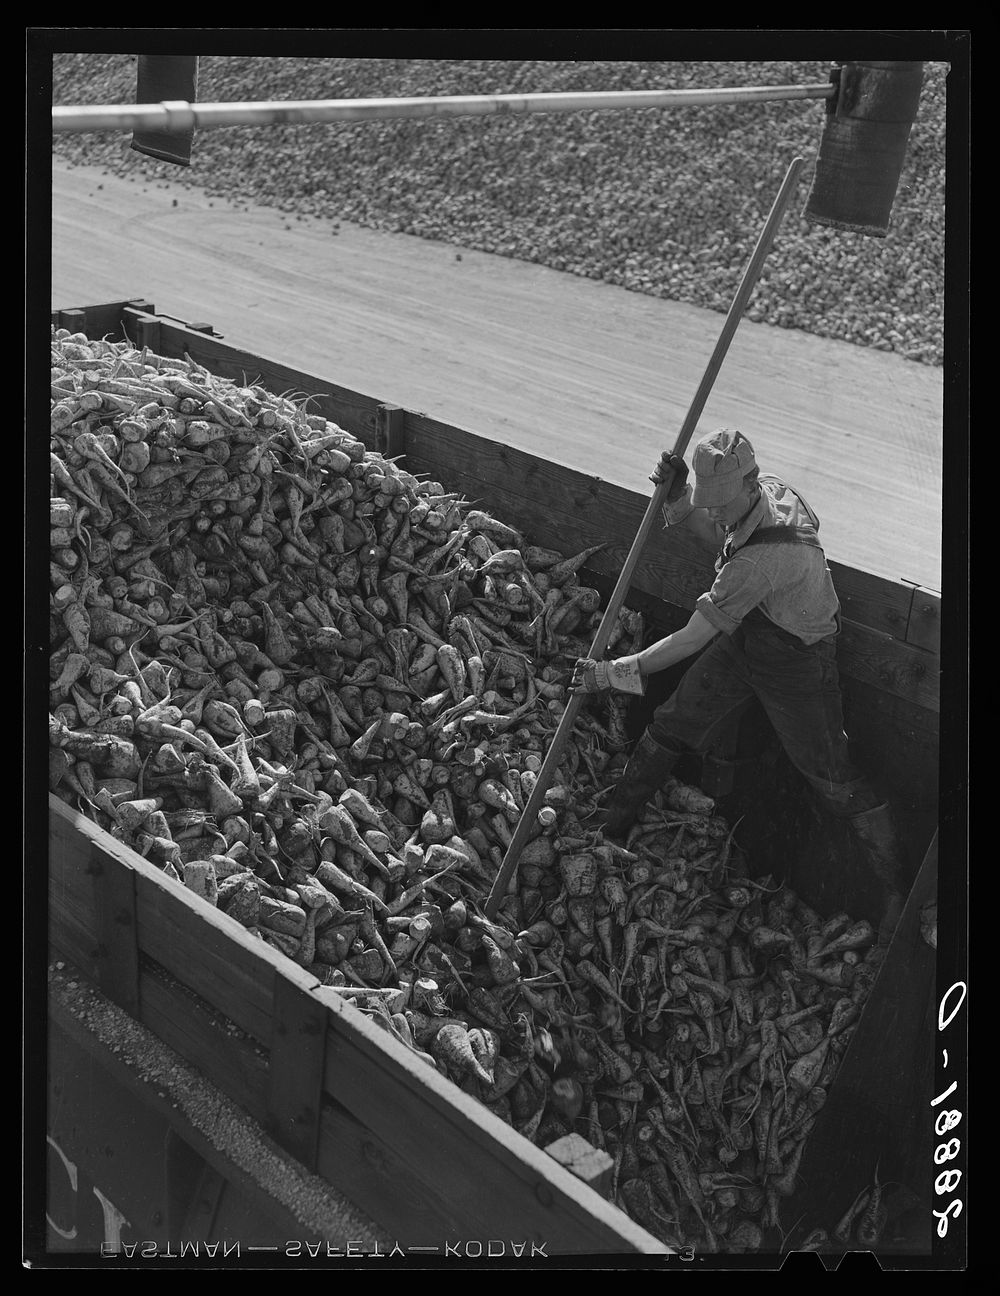 Unloading sugar beets at factory. Brighton, Colorado. Sourced from the Library of Congress.